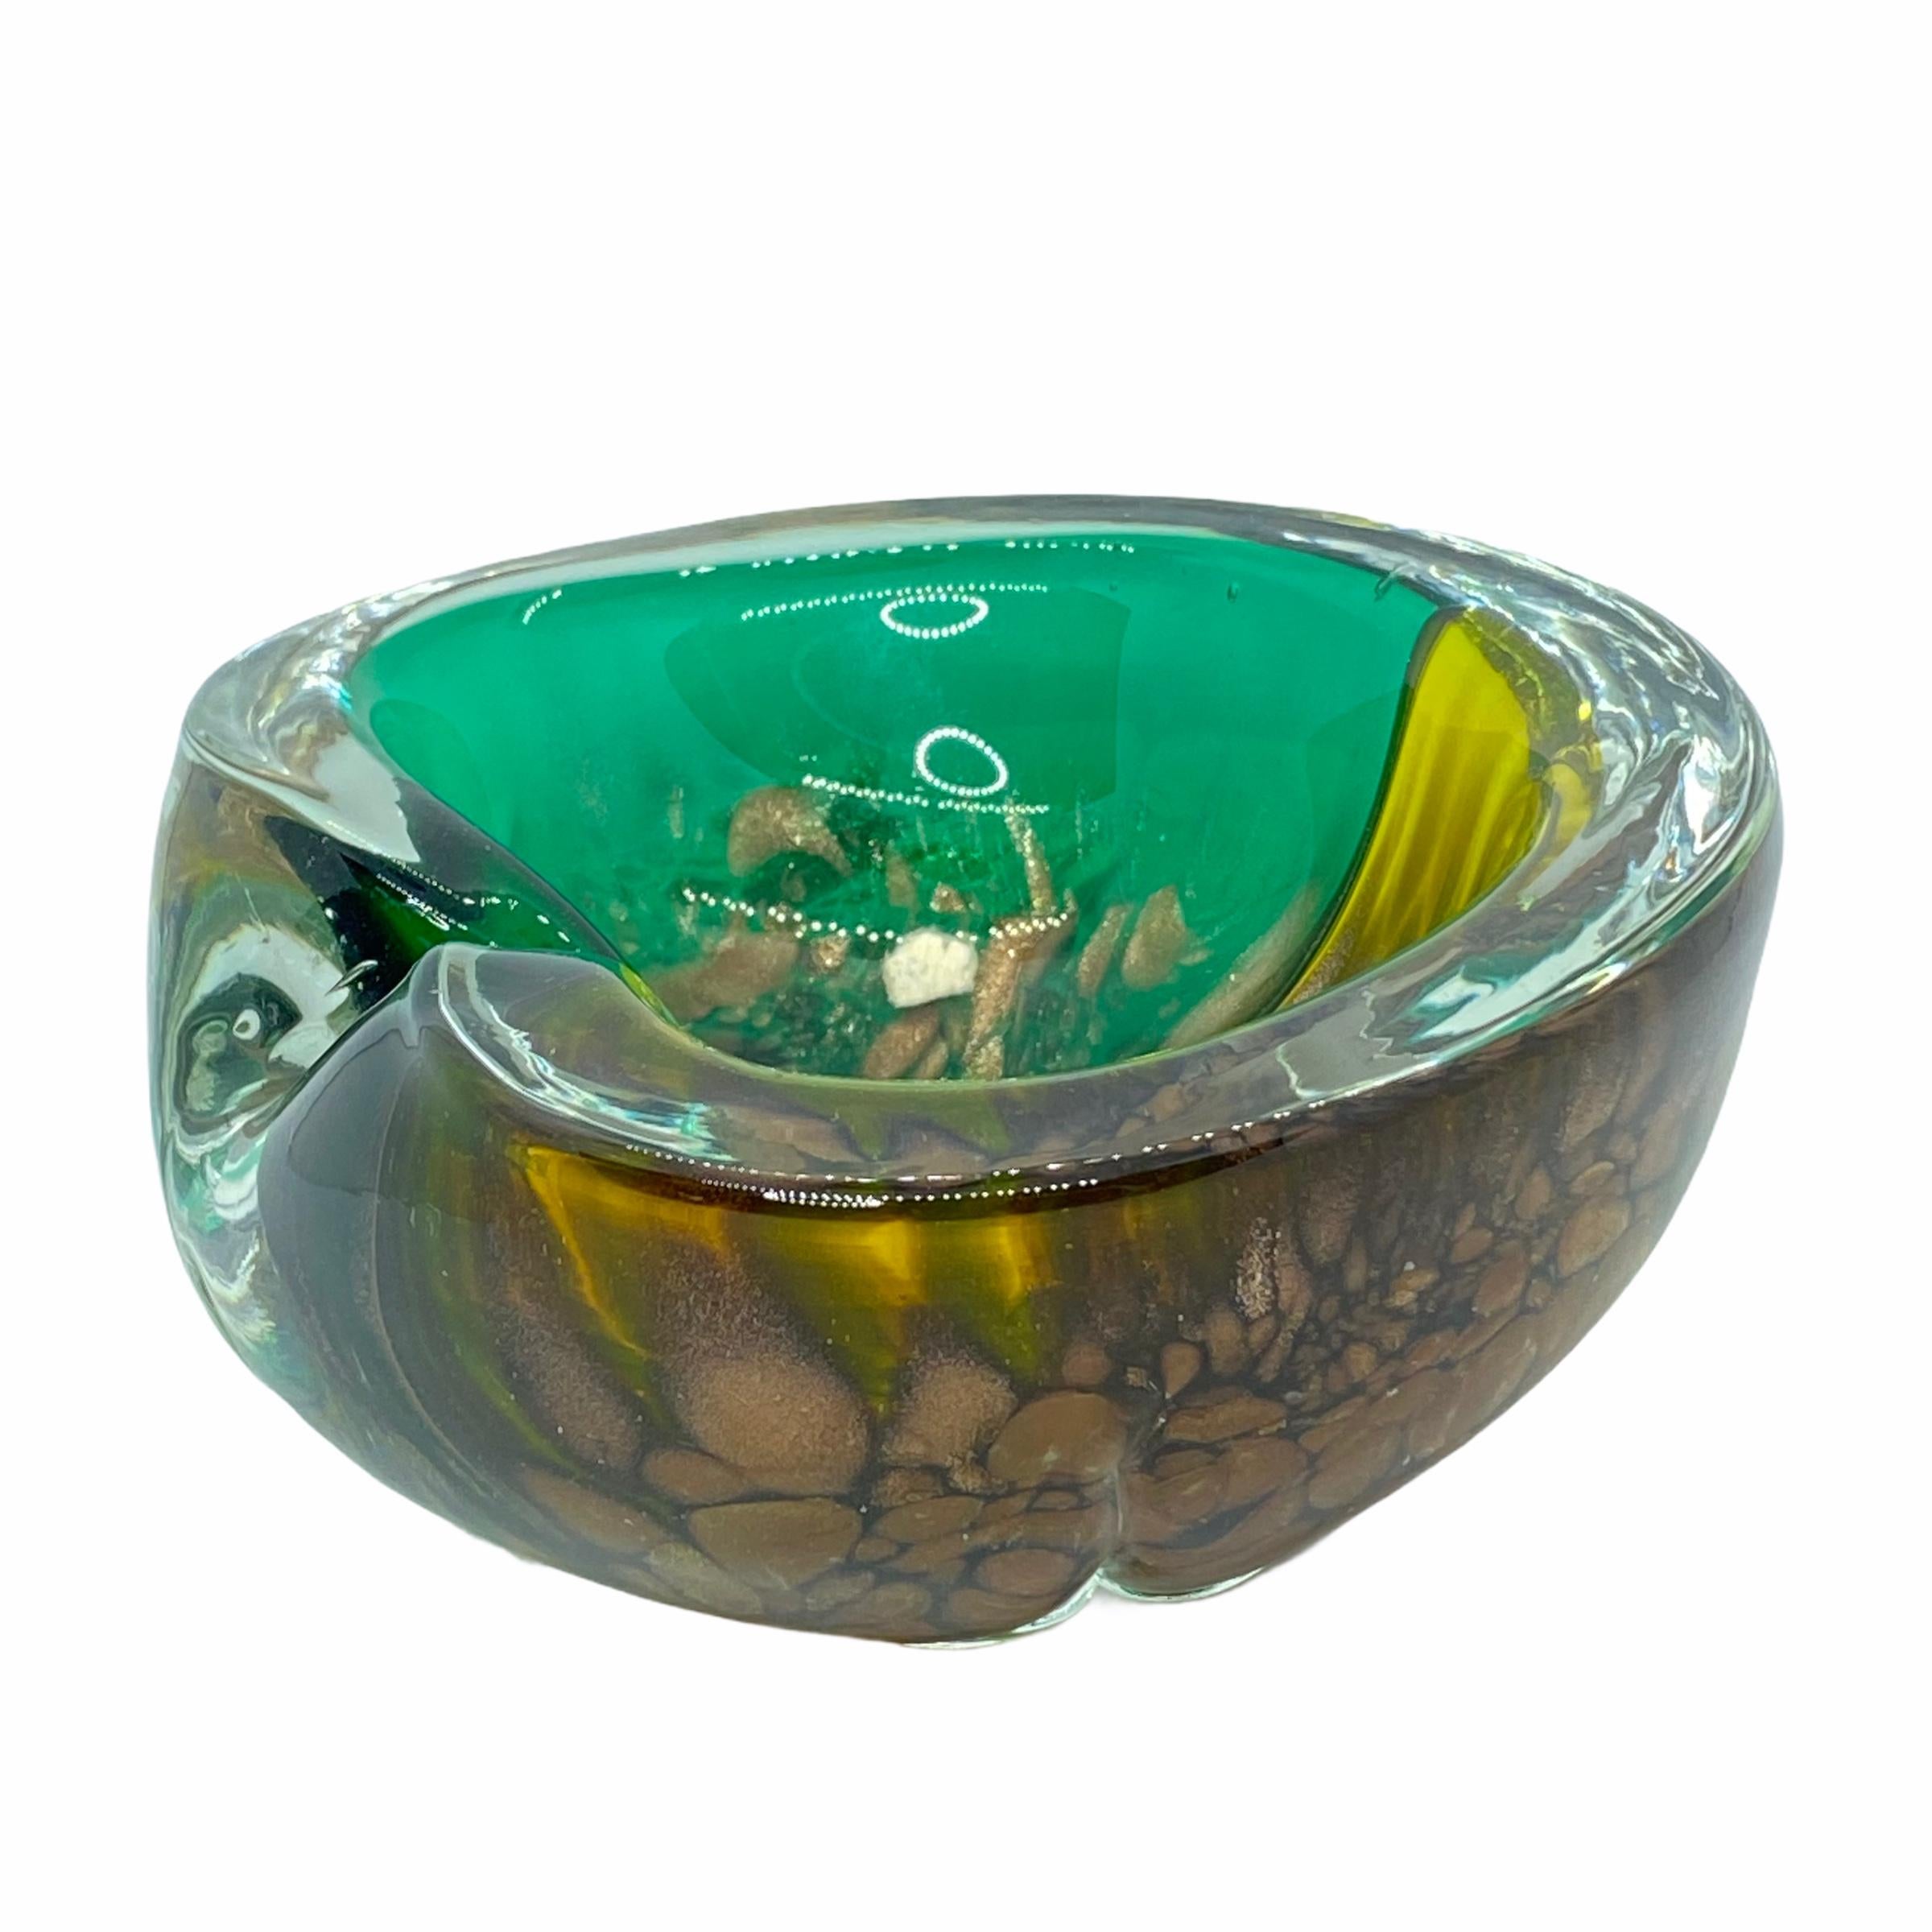 Gorgeous hand blown Murano art glass piece with Sommerso and bullicante techniques. A beautiful organic shaped bowl, catchall or cigar ashtray, Venice, Murano, Italy, 1970s. Part of the old murano label inside the bowl, like seen in last picture.